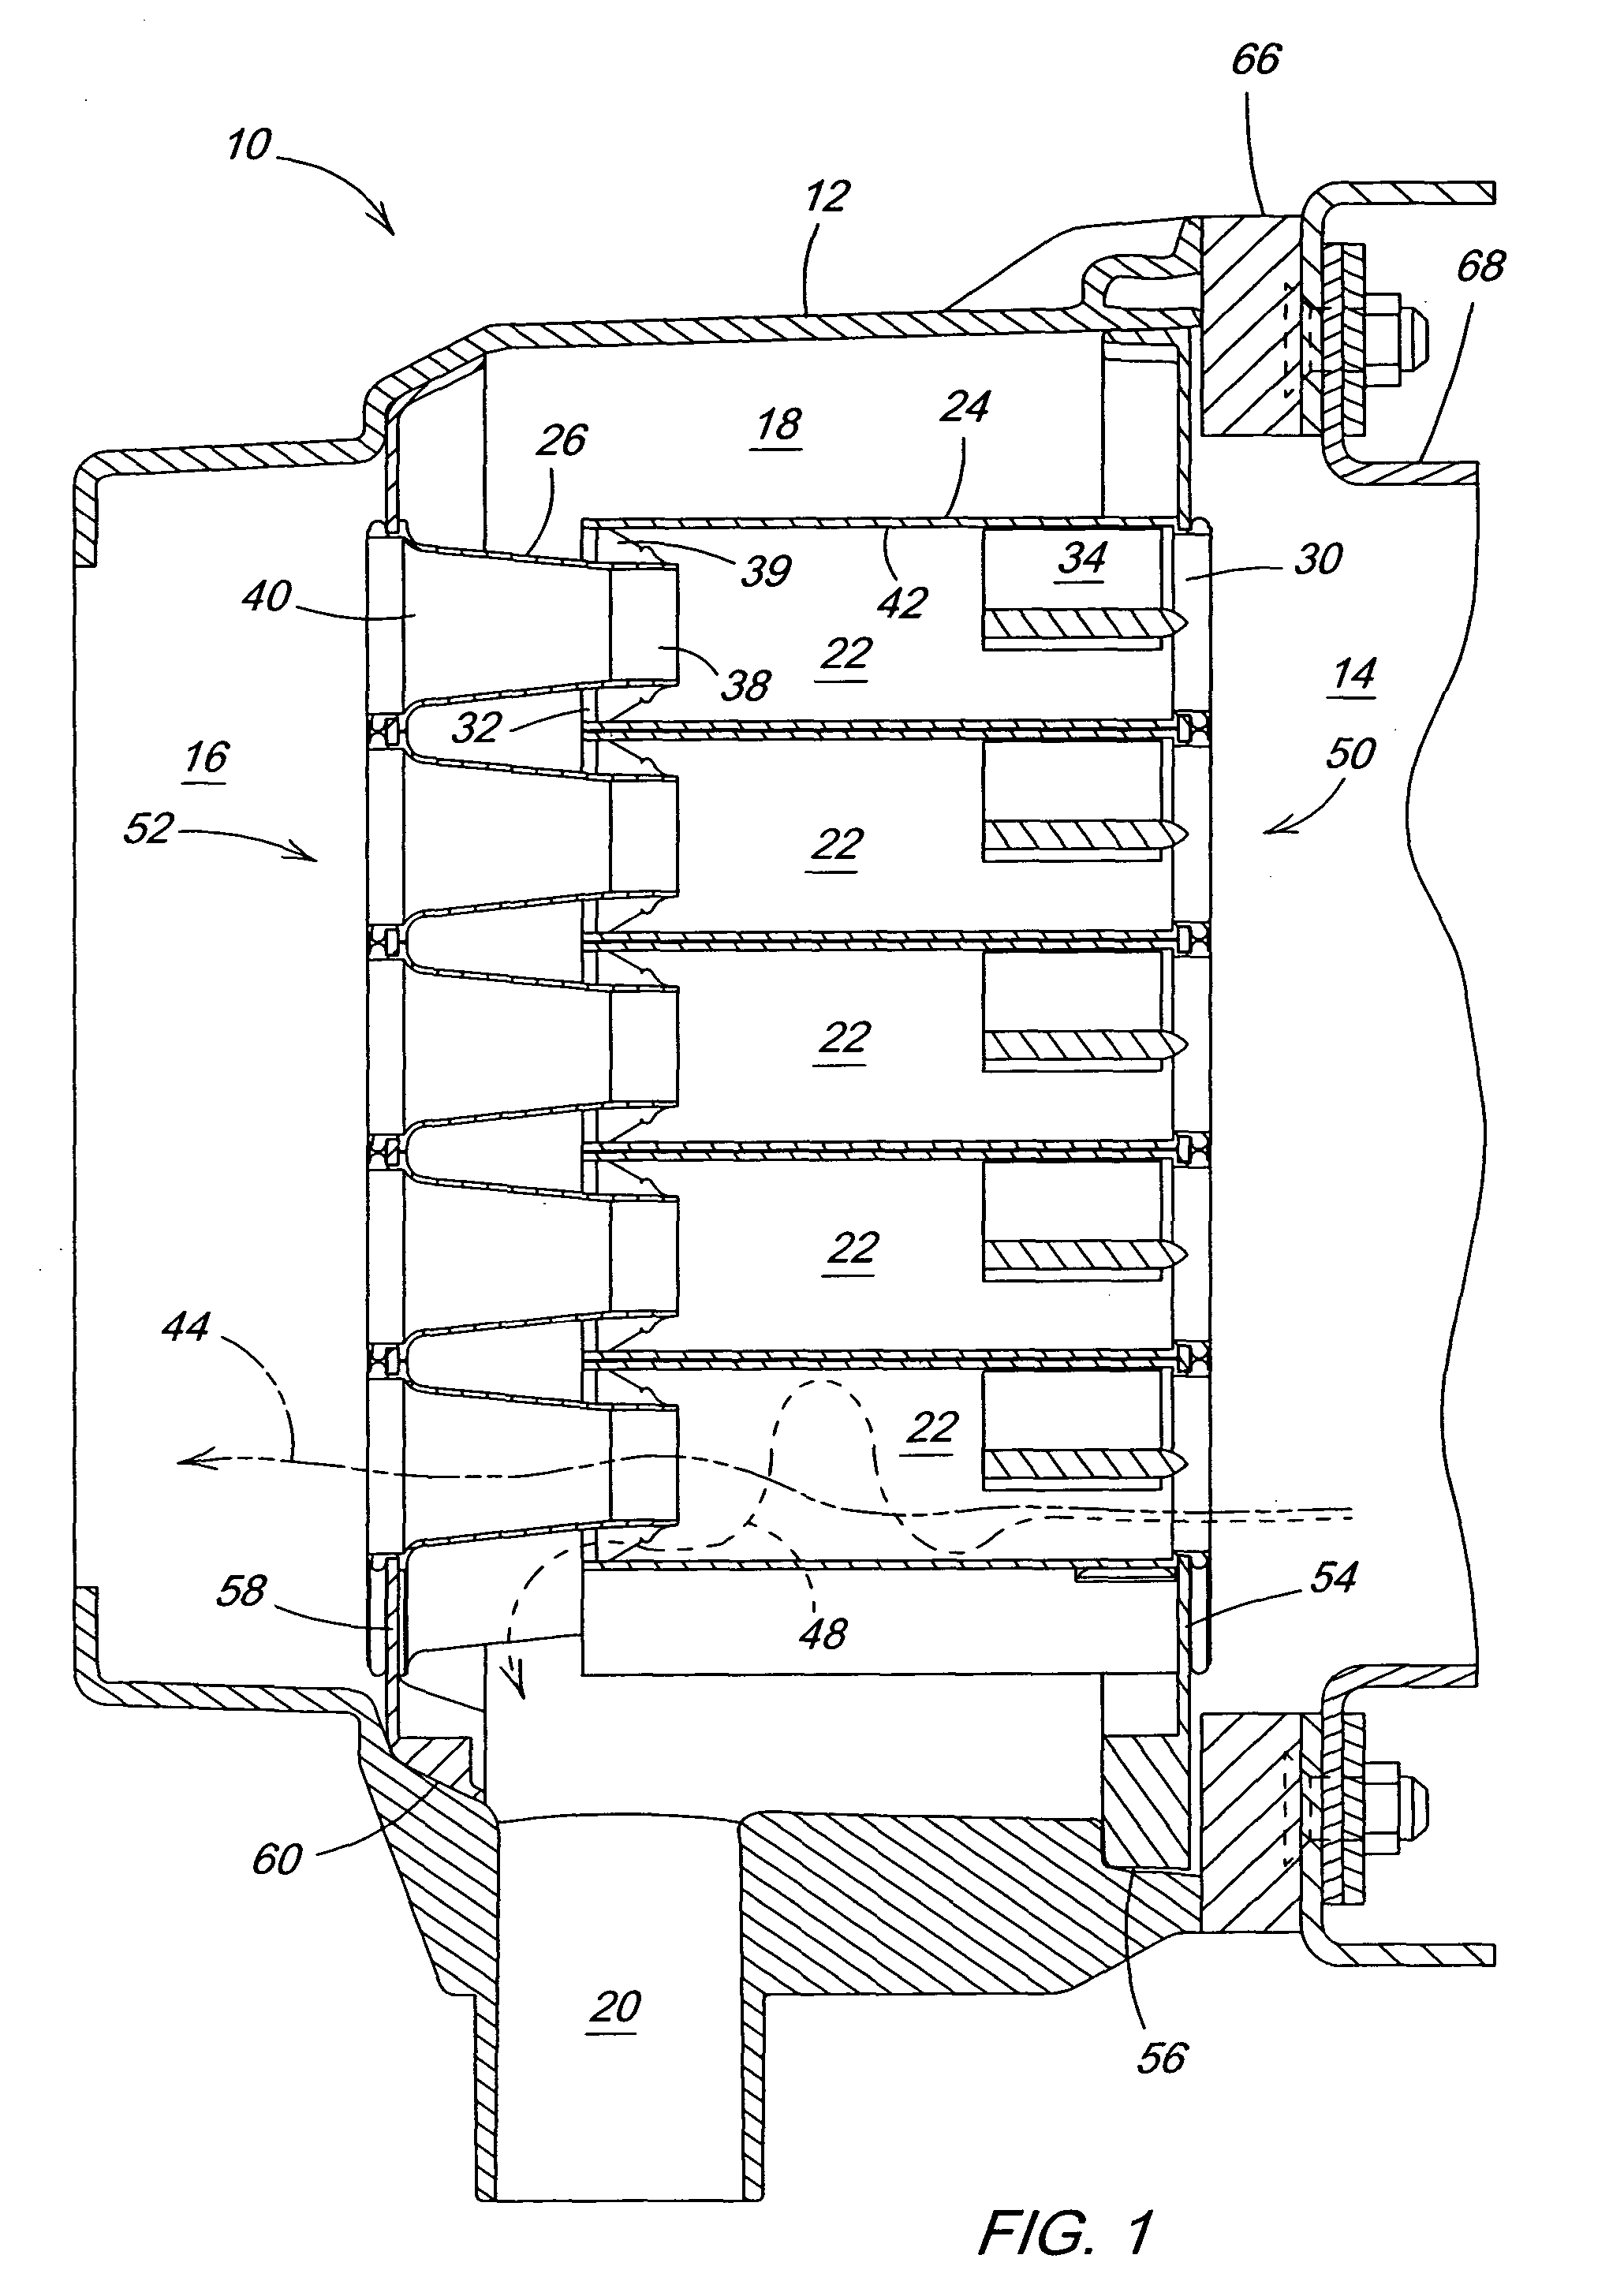 Serviceable vortex-type filter assembly and method for servicing same